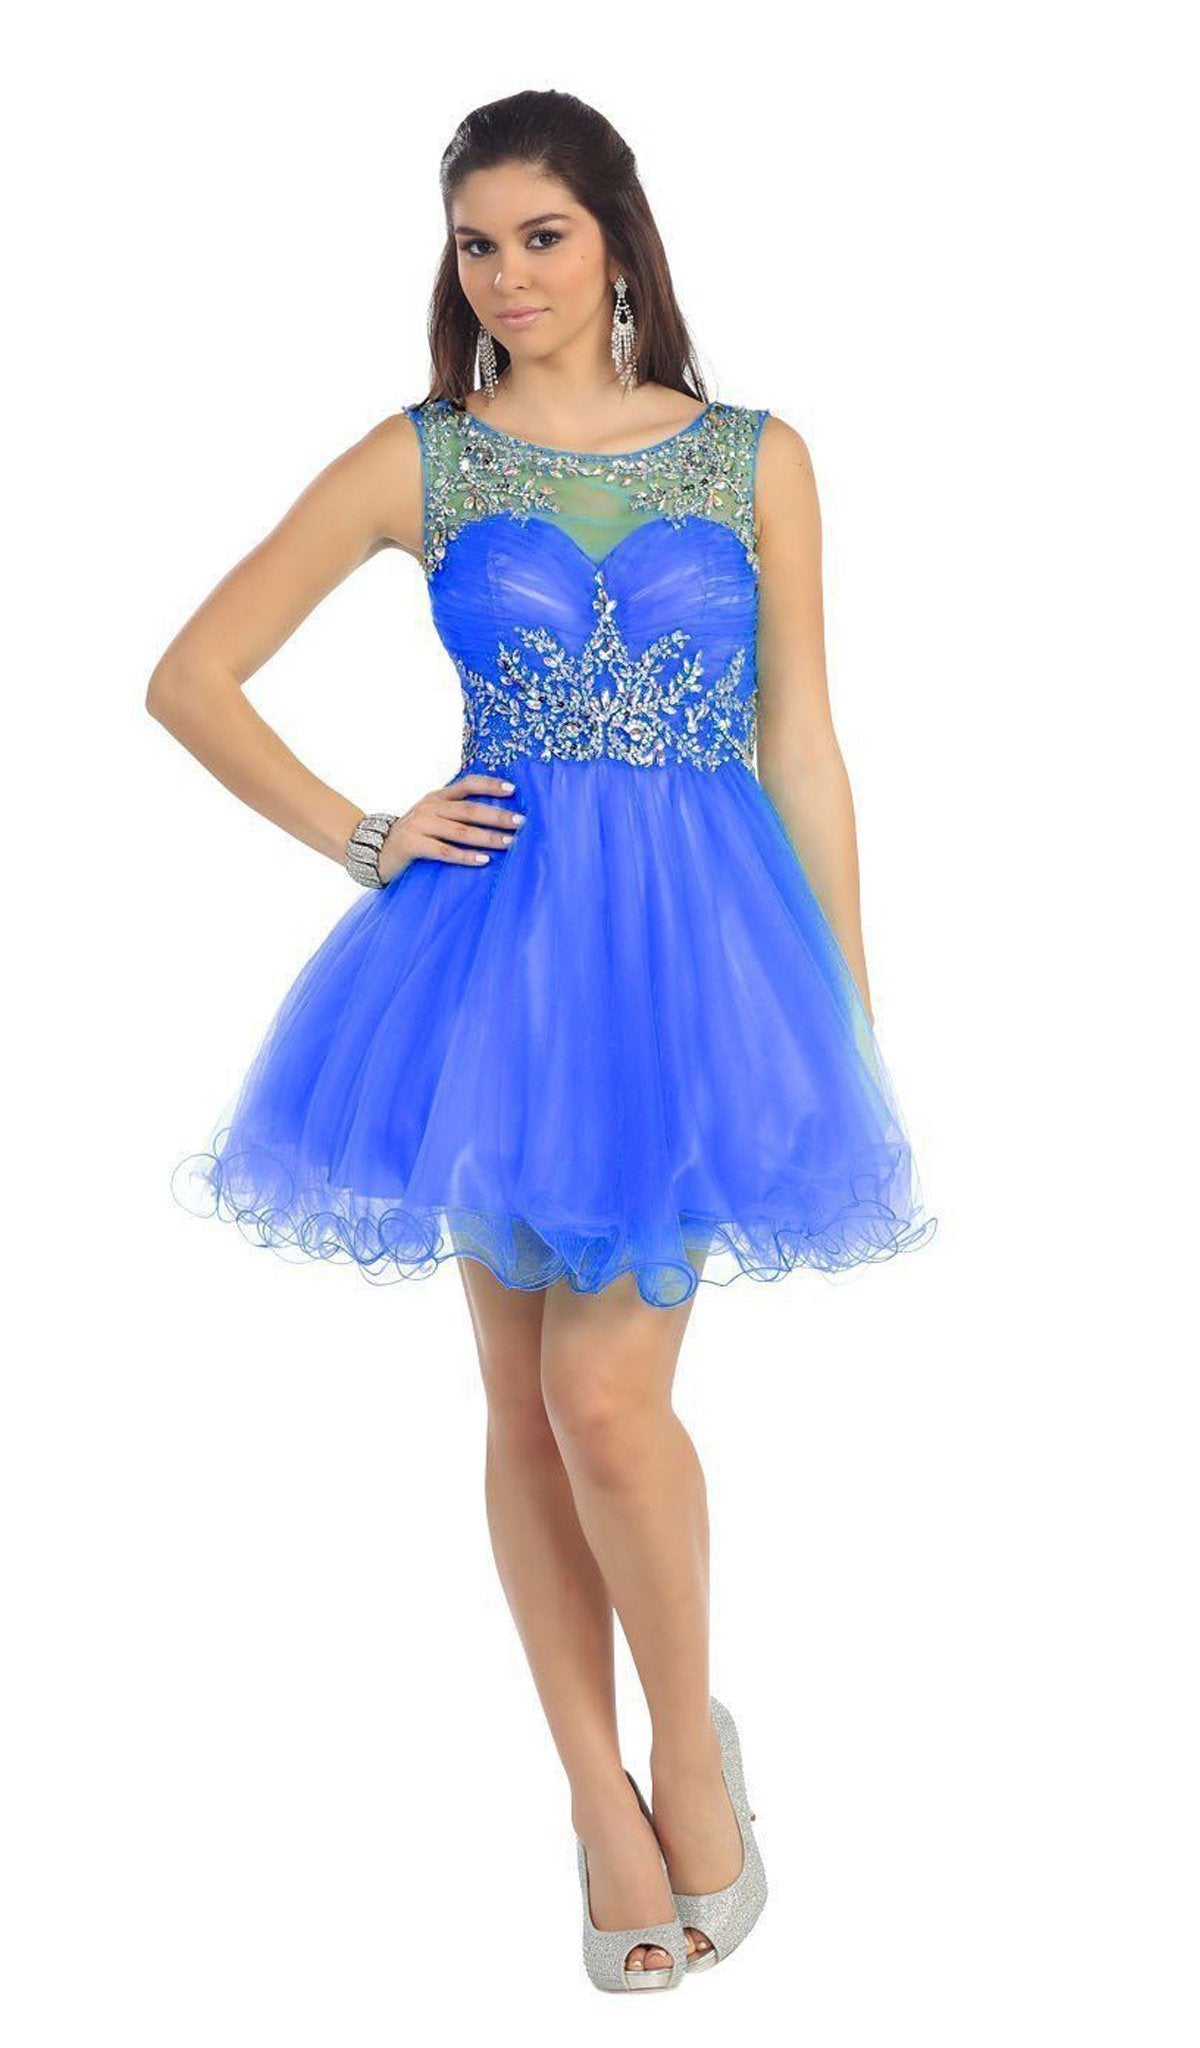 May Queen - Stunning Beaded Illusion Neck Cocktail Dress Special Occasion Dress 4 / Royal